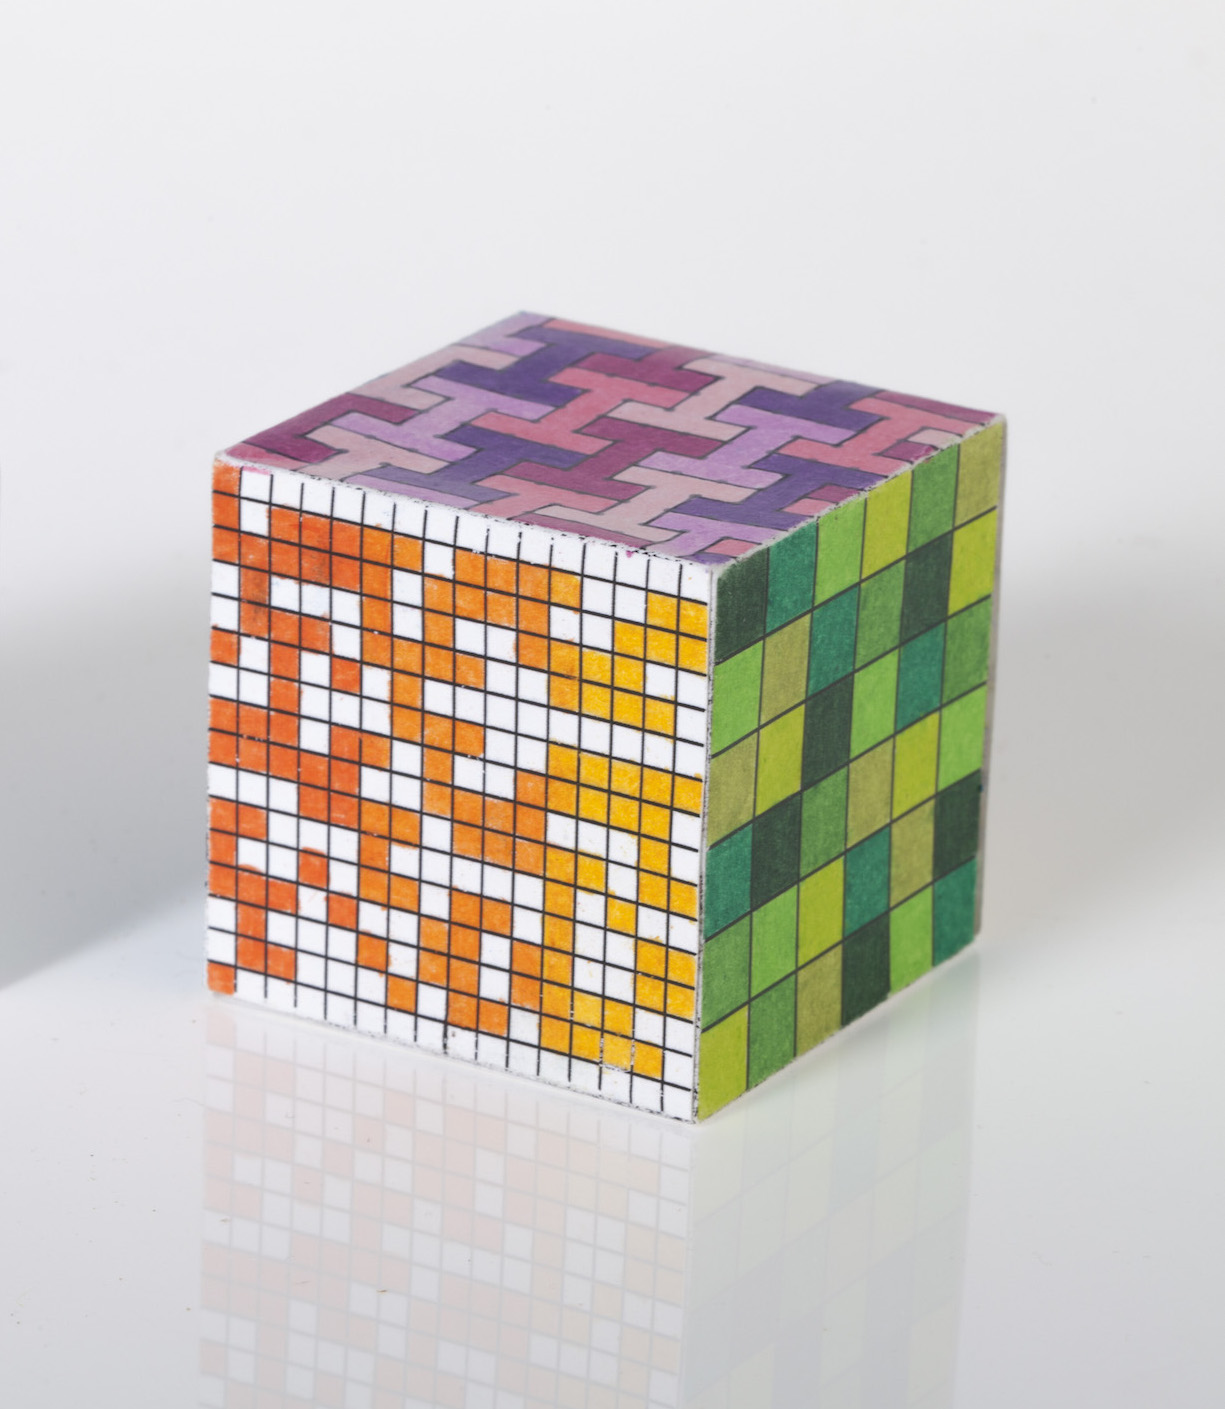 Cube with each side coloured in a different mathematical pattern